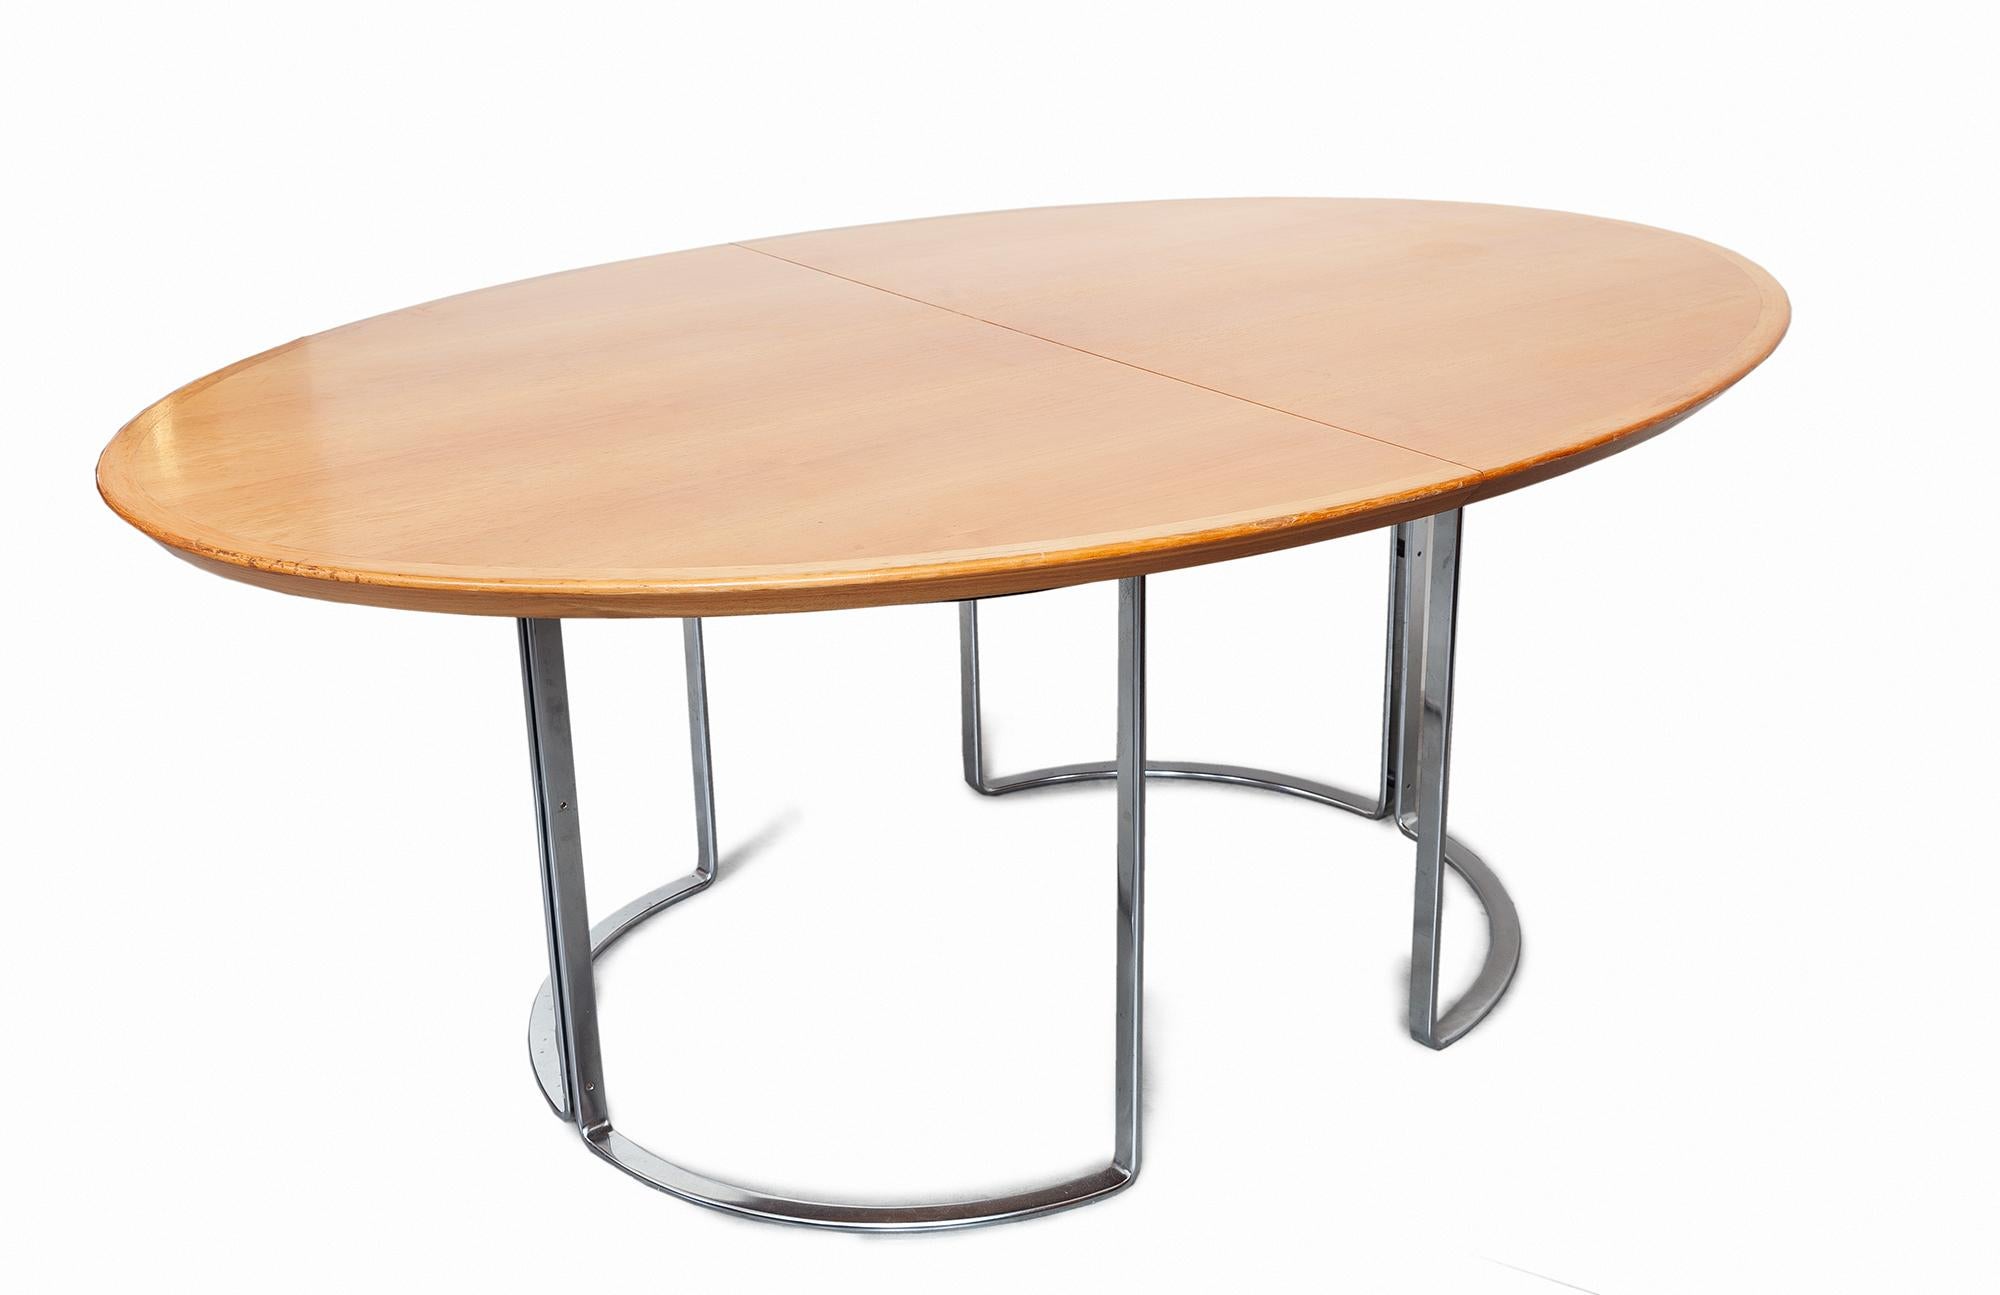 Extendable dining or conference table by Horst Brüning, Germany, 1970s.This is truly a stunning table with many options, there are two walnuts contrasting leafs the table can be extended to 3 meters it has an oval shape that is preserved with the